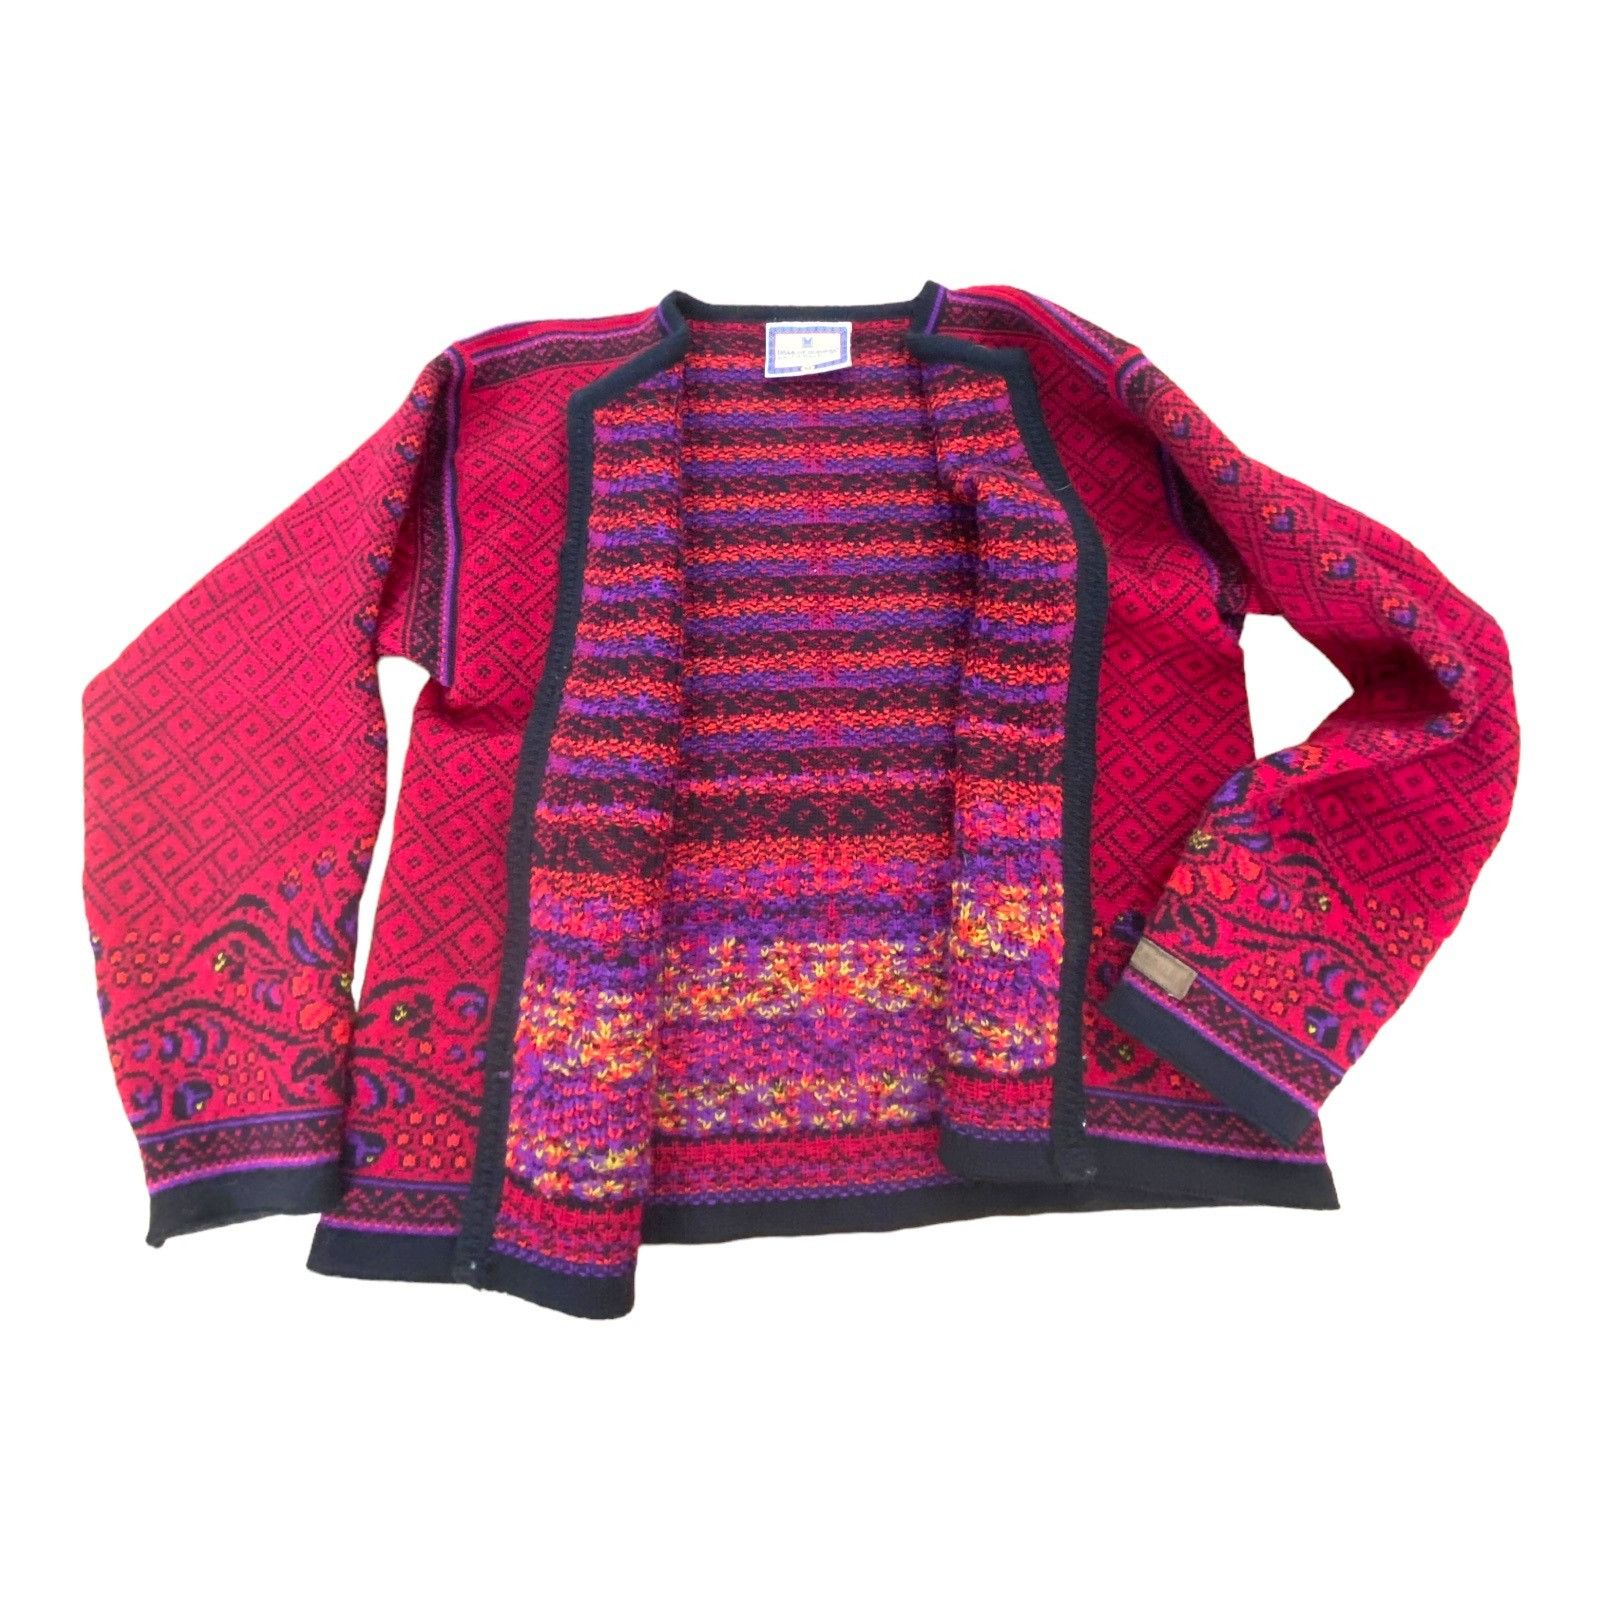 Dale Of Norway Dale of Norway Wool Cardigan Sweater Red Purple Pewter Butto Size M / US 6-8 / IT 42-44 - 7 Thumbnail